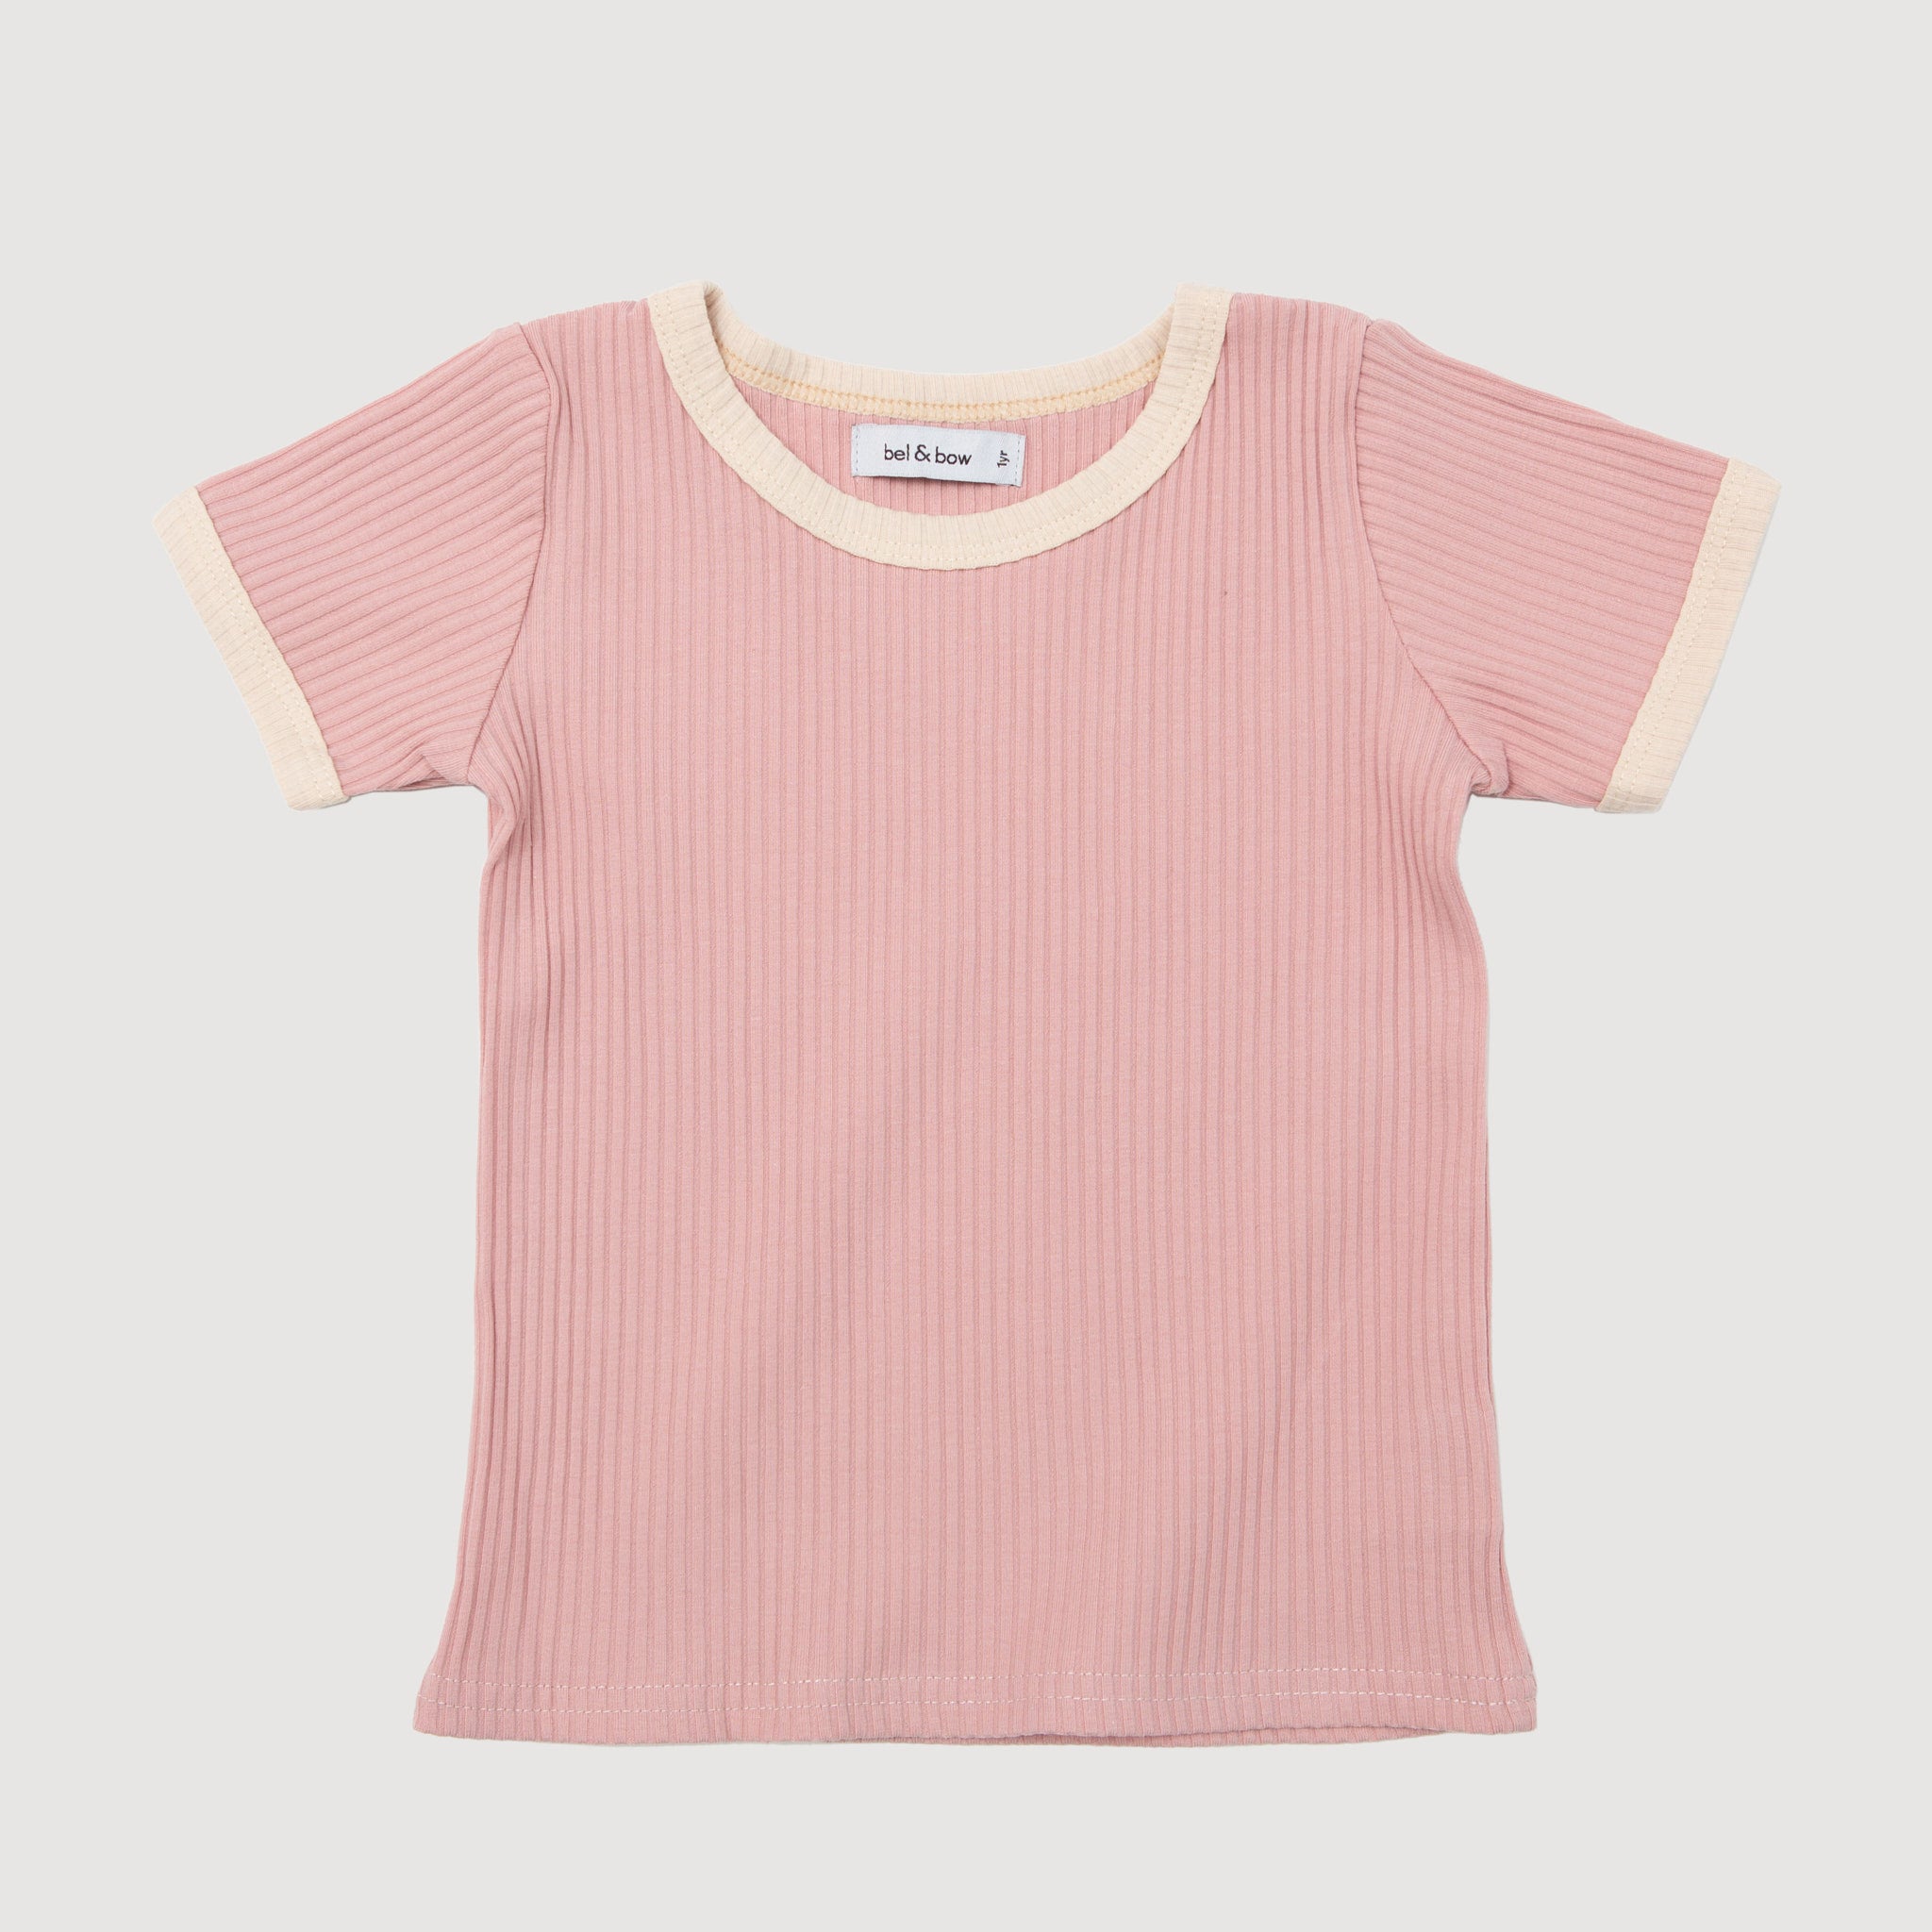 Retro Ringer Ribbed Tee - Musk Pink bel & bow